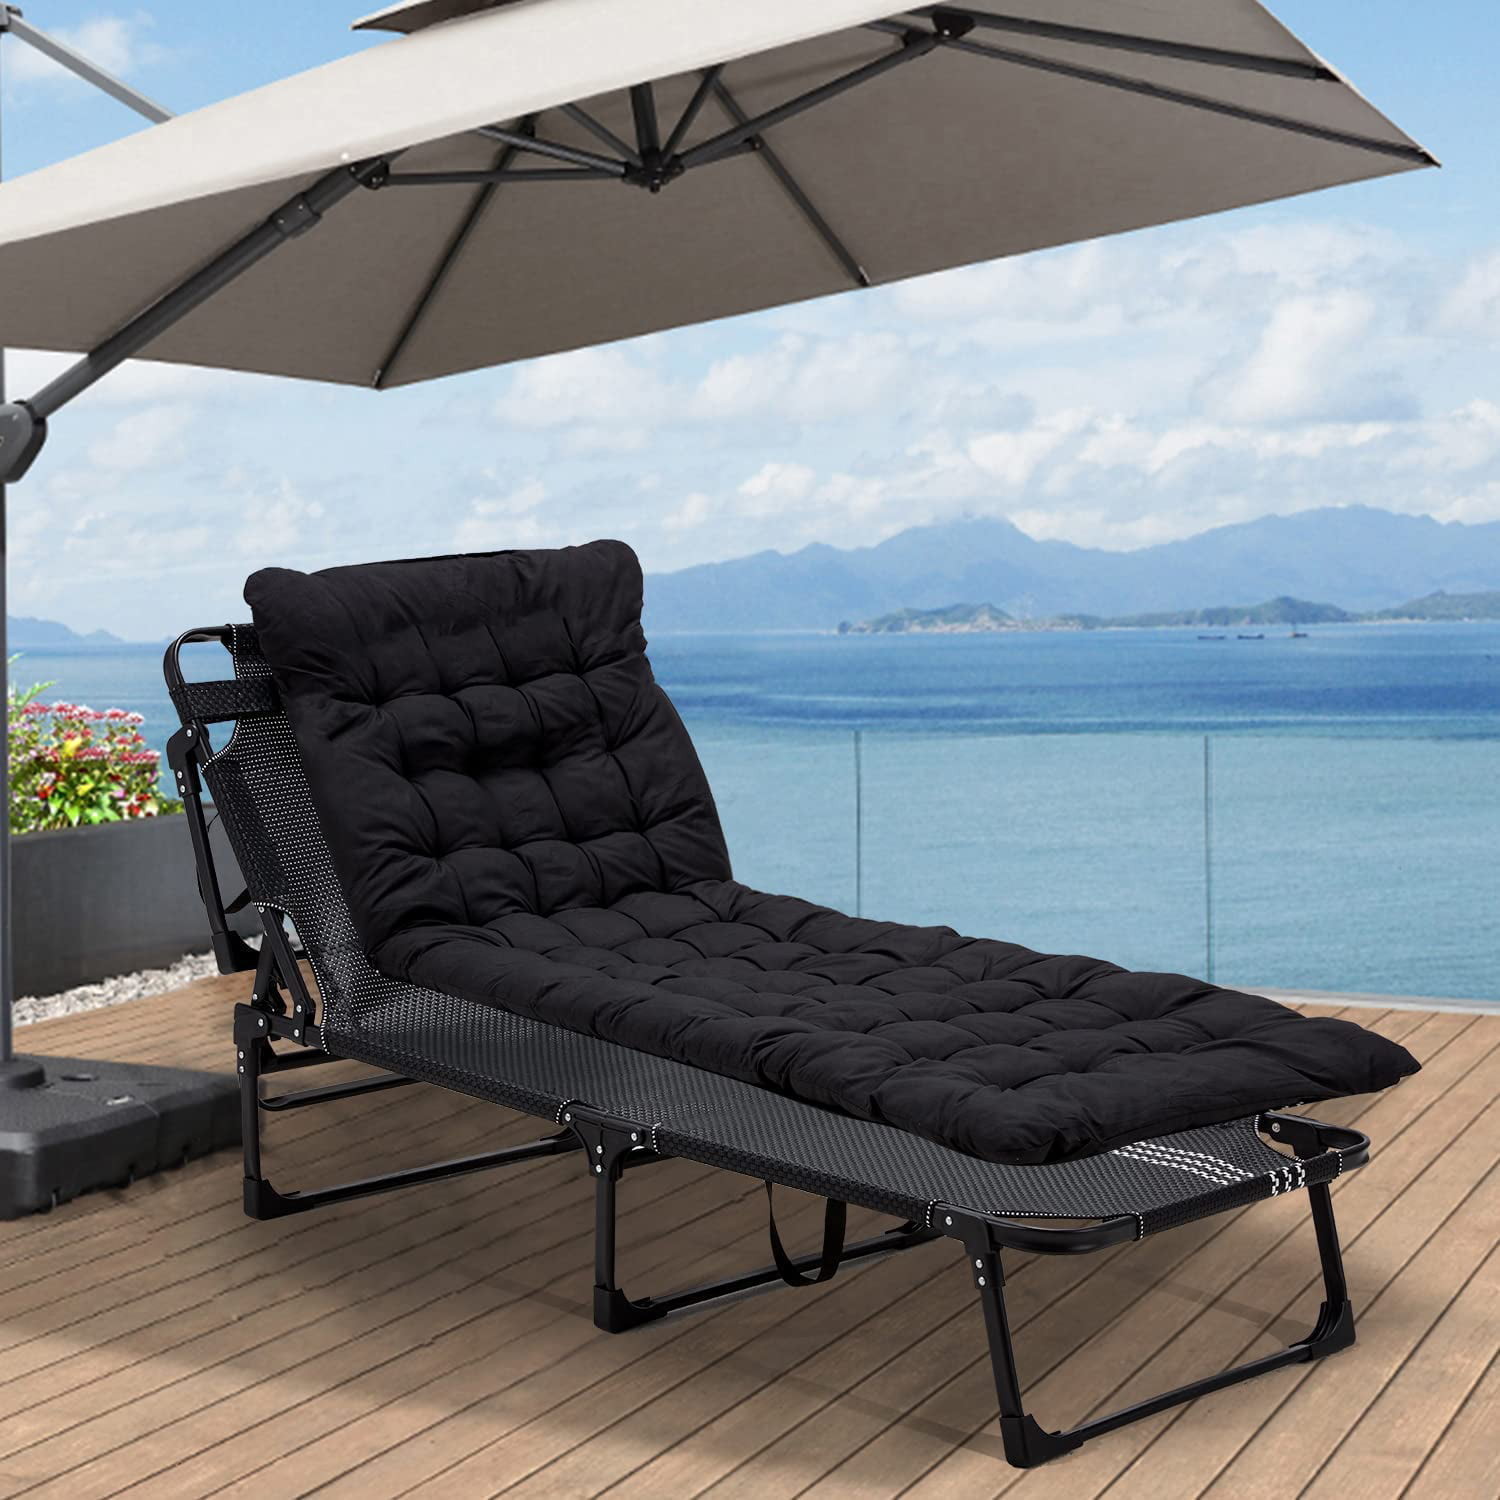 Yoleny 4-Fold Portable Folding Chaise Lounge Chair,Camping Cot, Support 400lb, with Pillow and Mattress, Adjustable Patio Recliner for Garden Beach Outdoor/Indoor (Black)